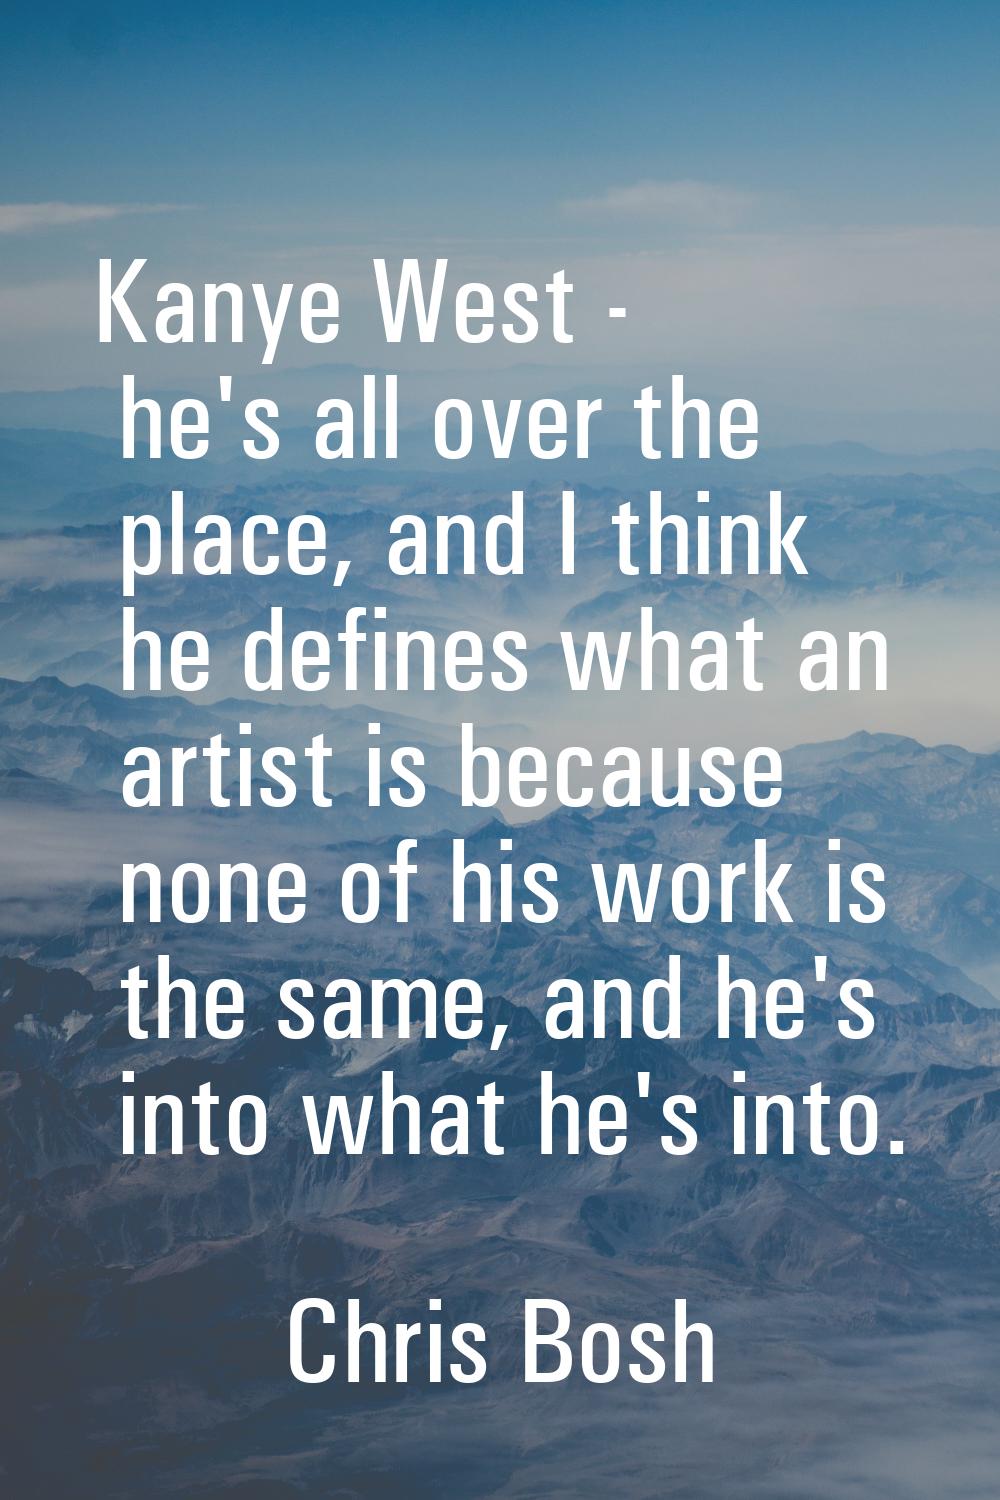 Kanye West - he's all over the place, and I think he defines what an artist is because none of his 